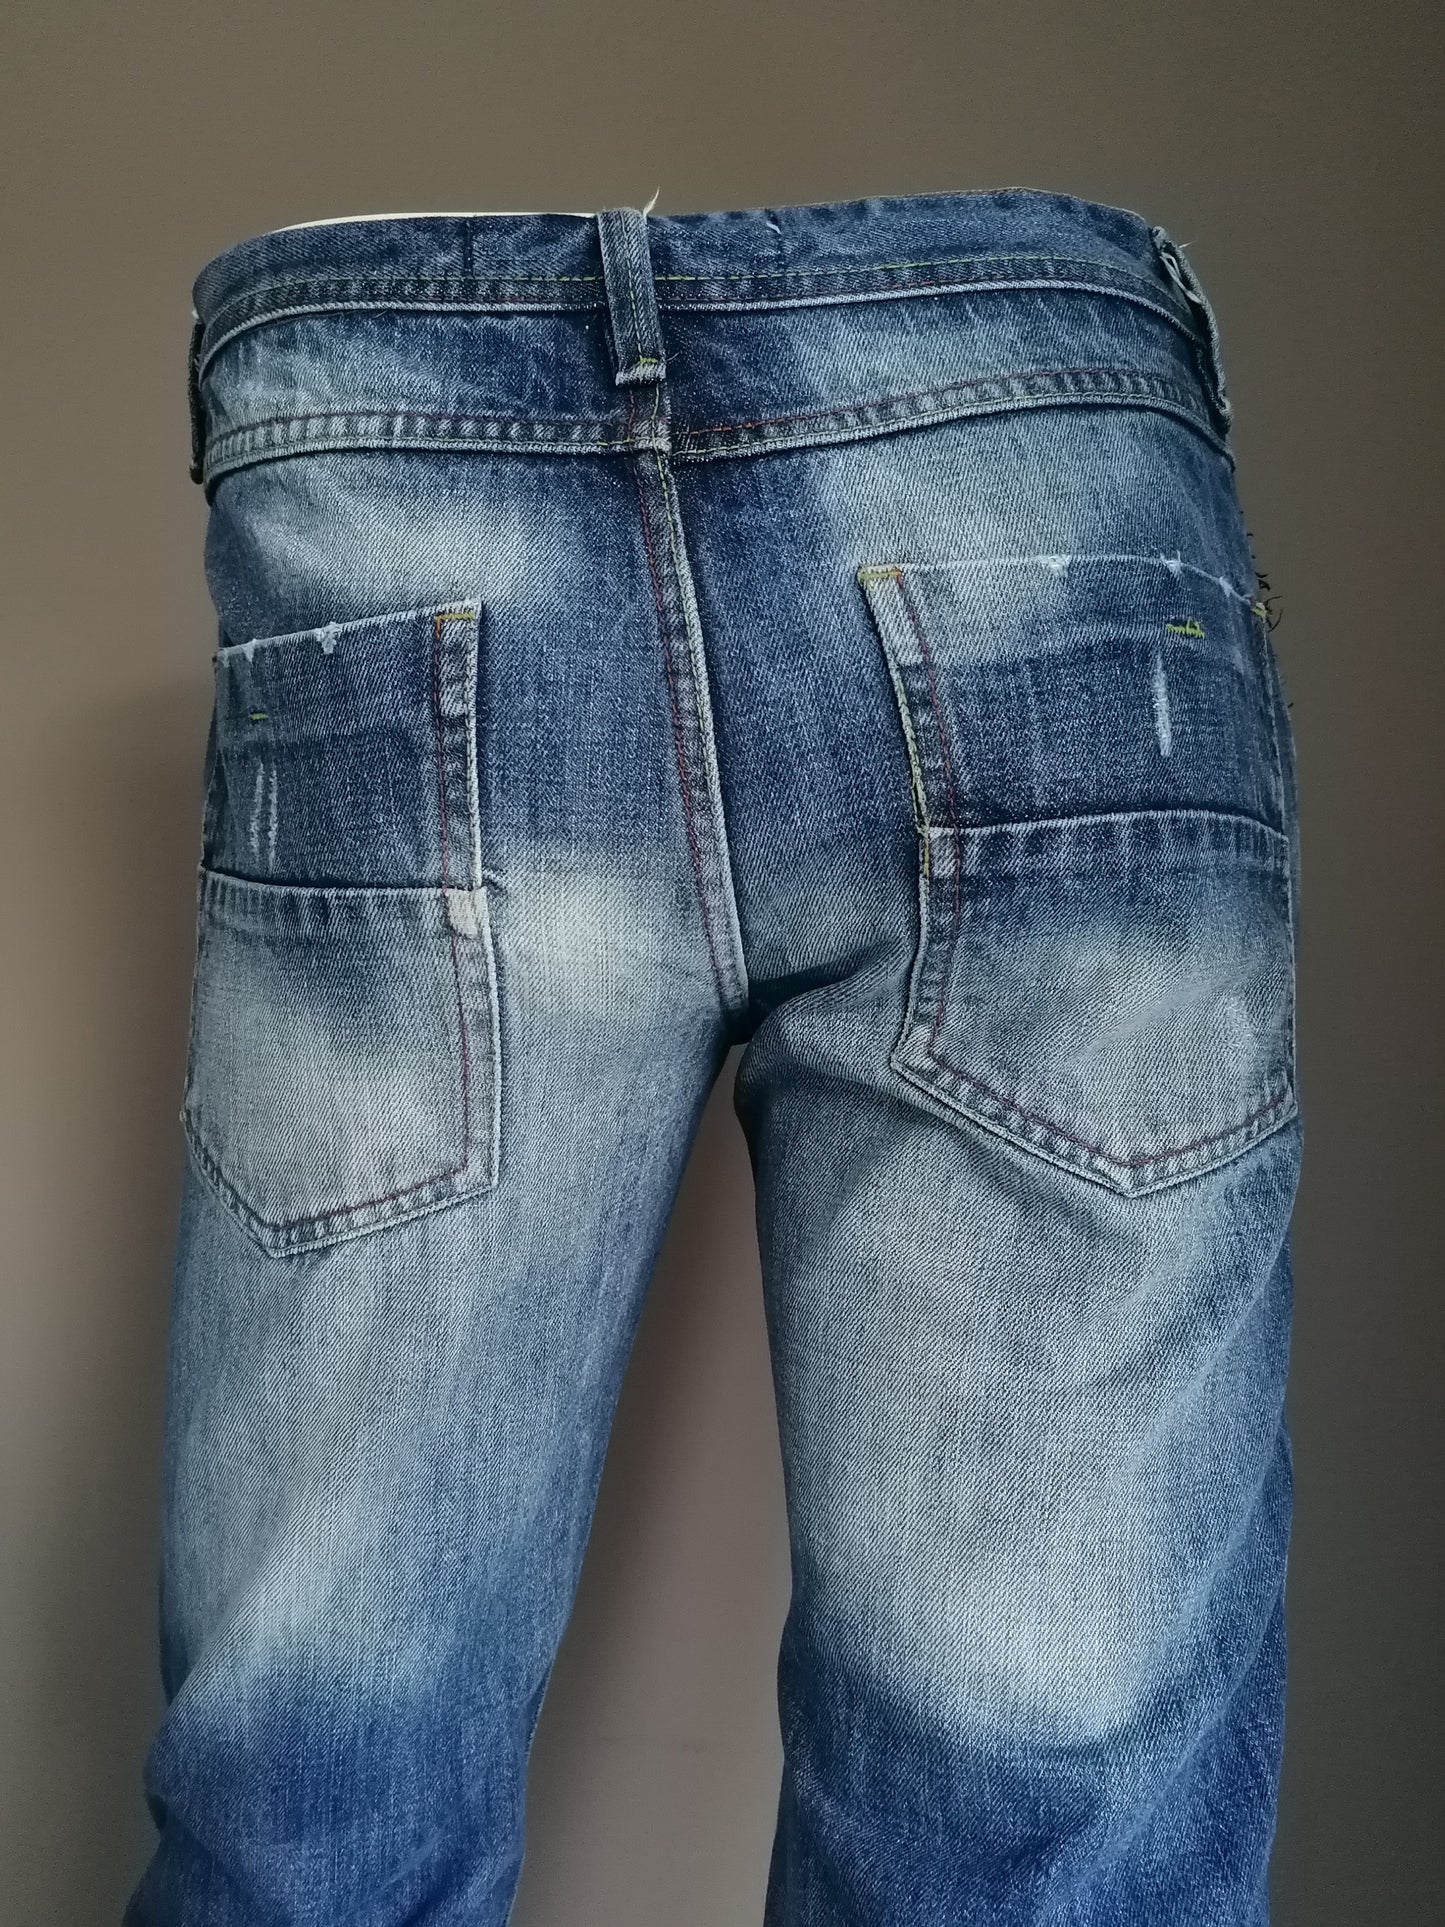 Jeans New Look. Couleur bleue. Taille W30 - L30. Jambe droite.